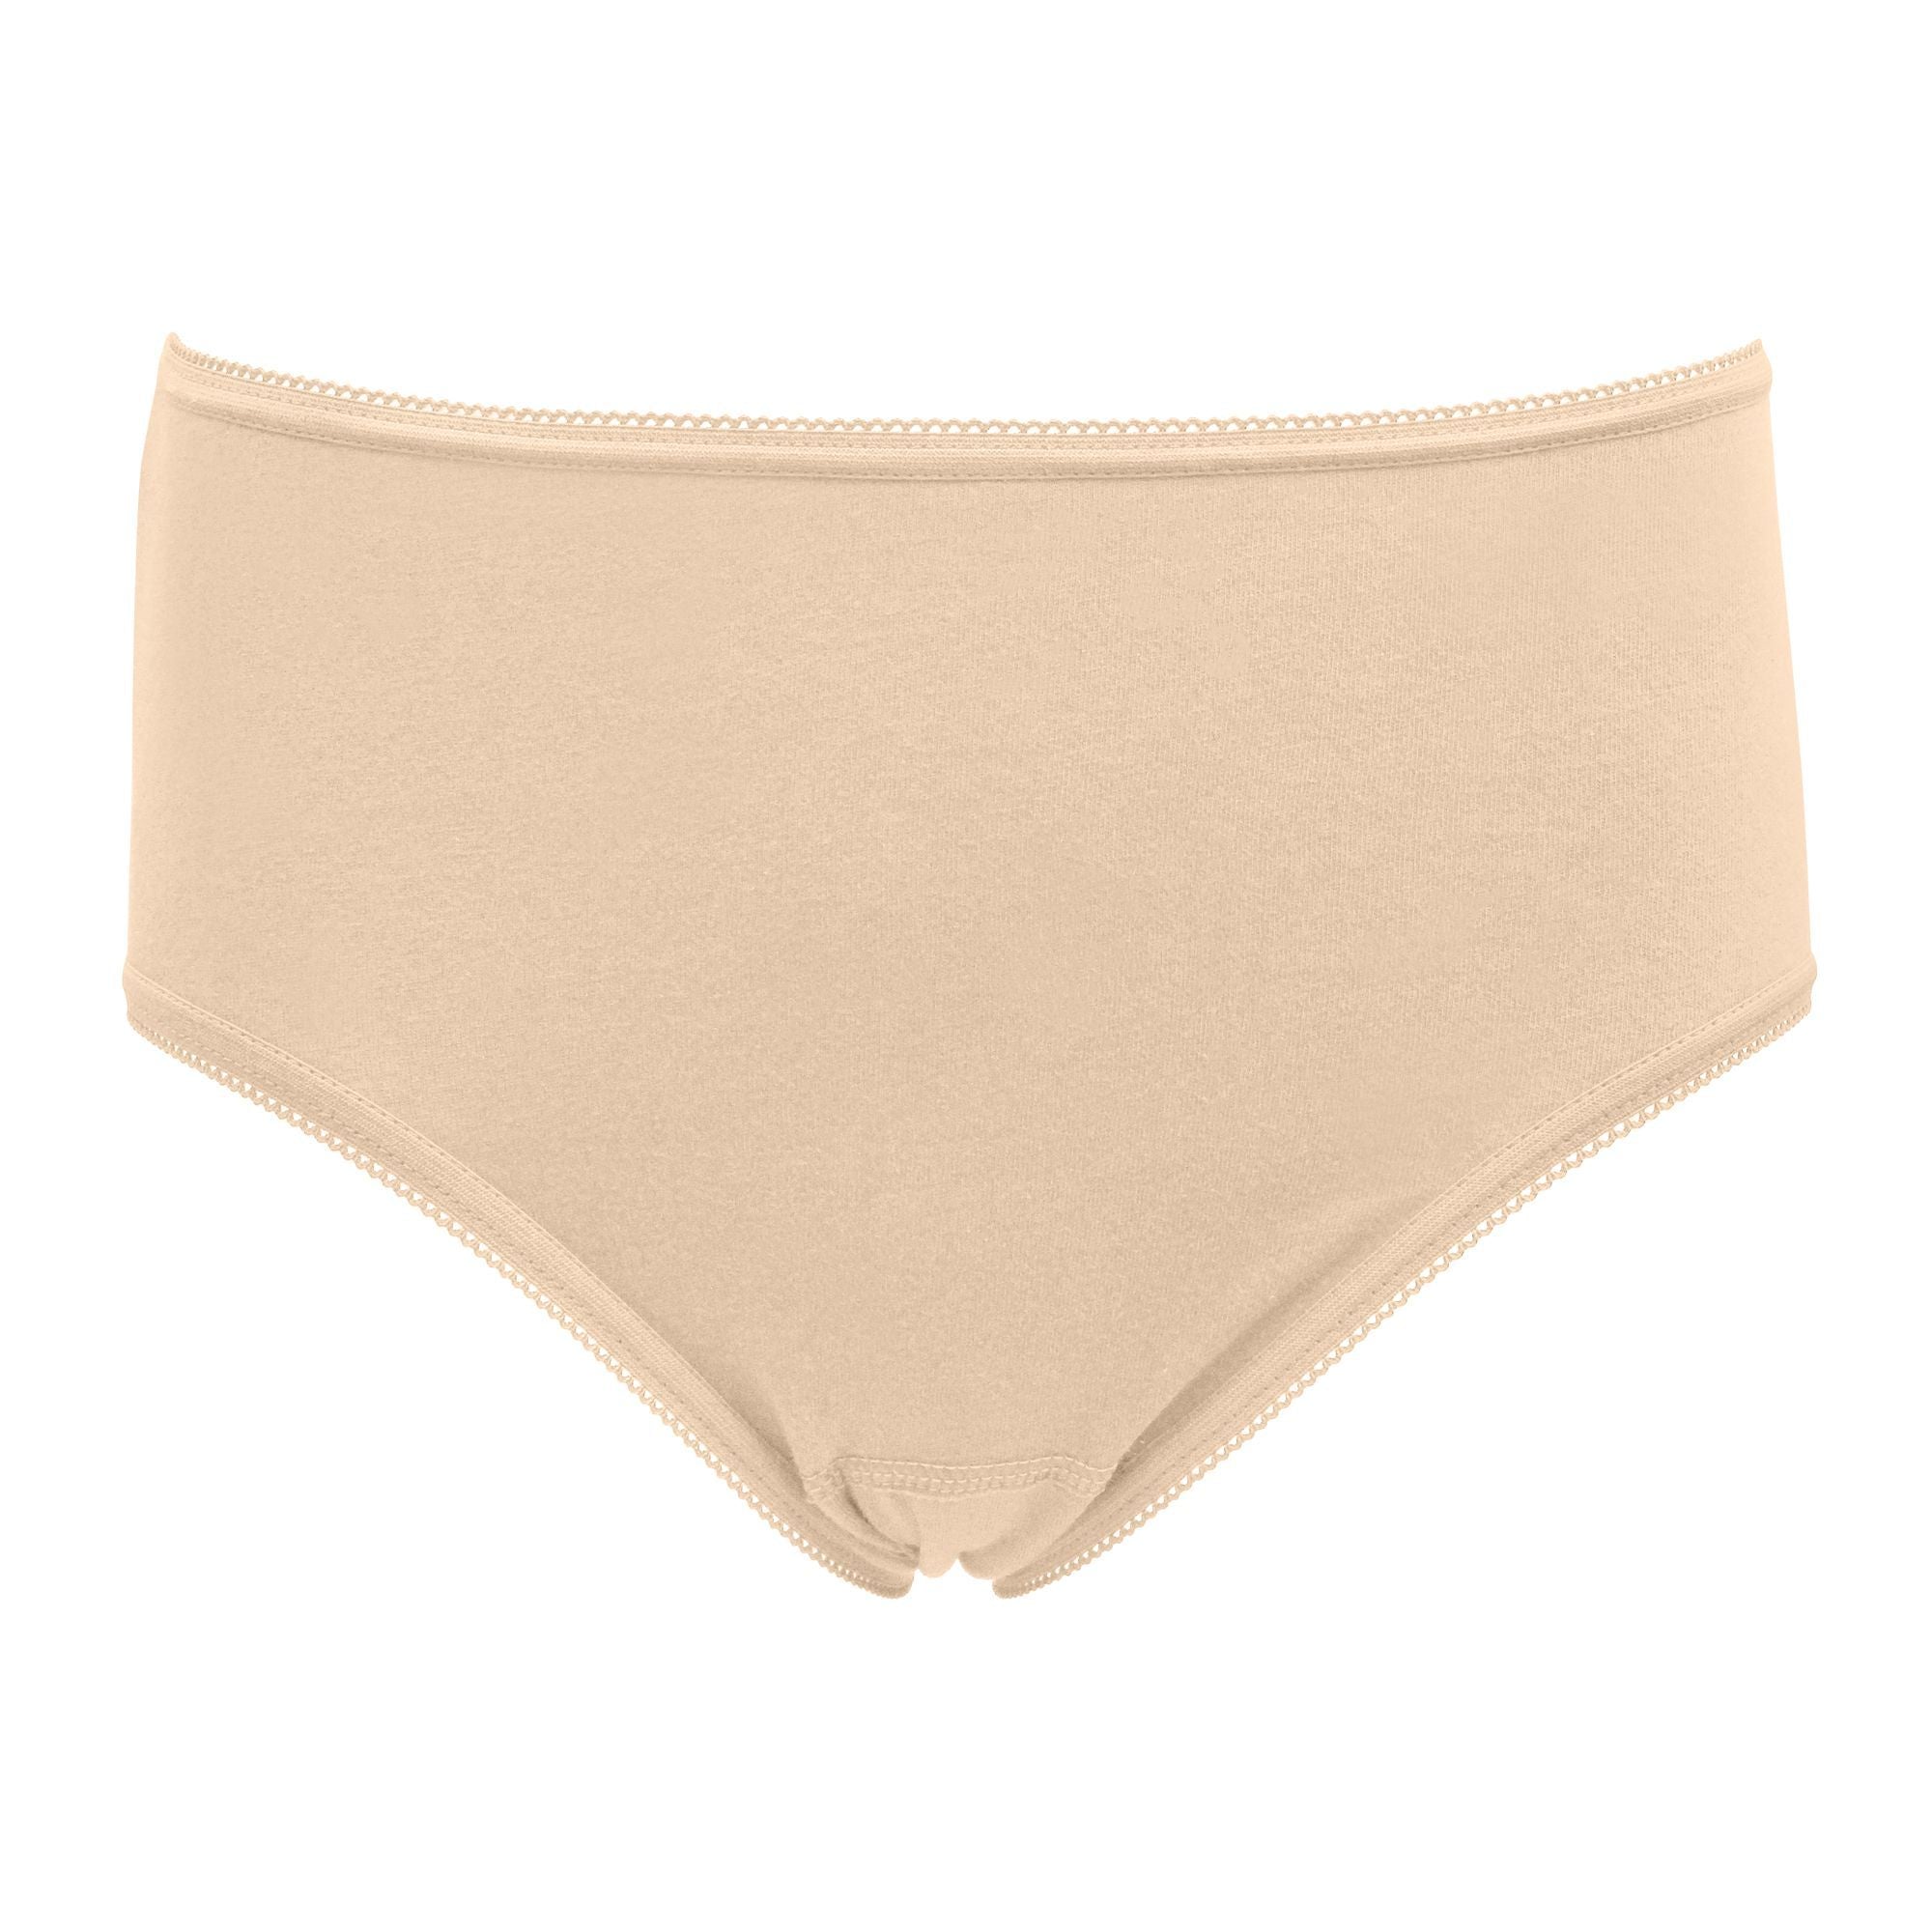 IFG Deluxe Brief Panty, Skin – Babe Theory